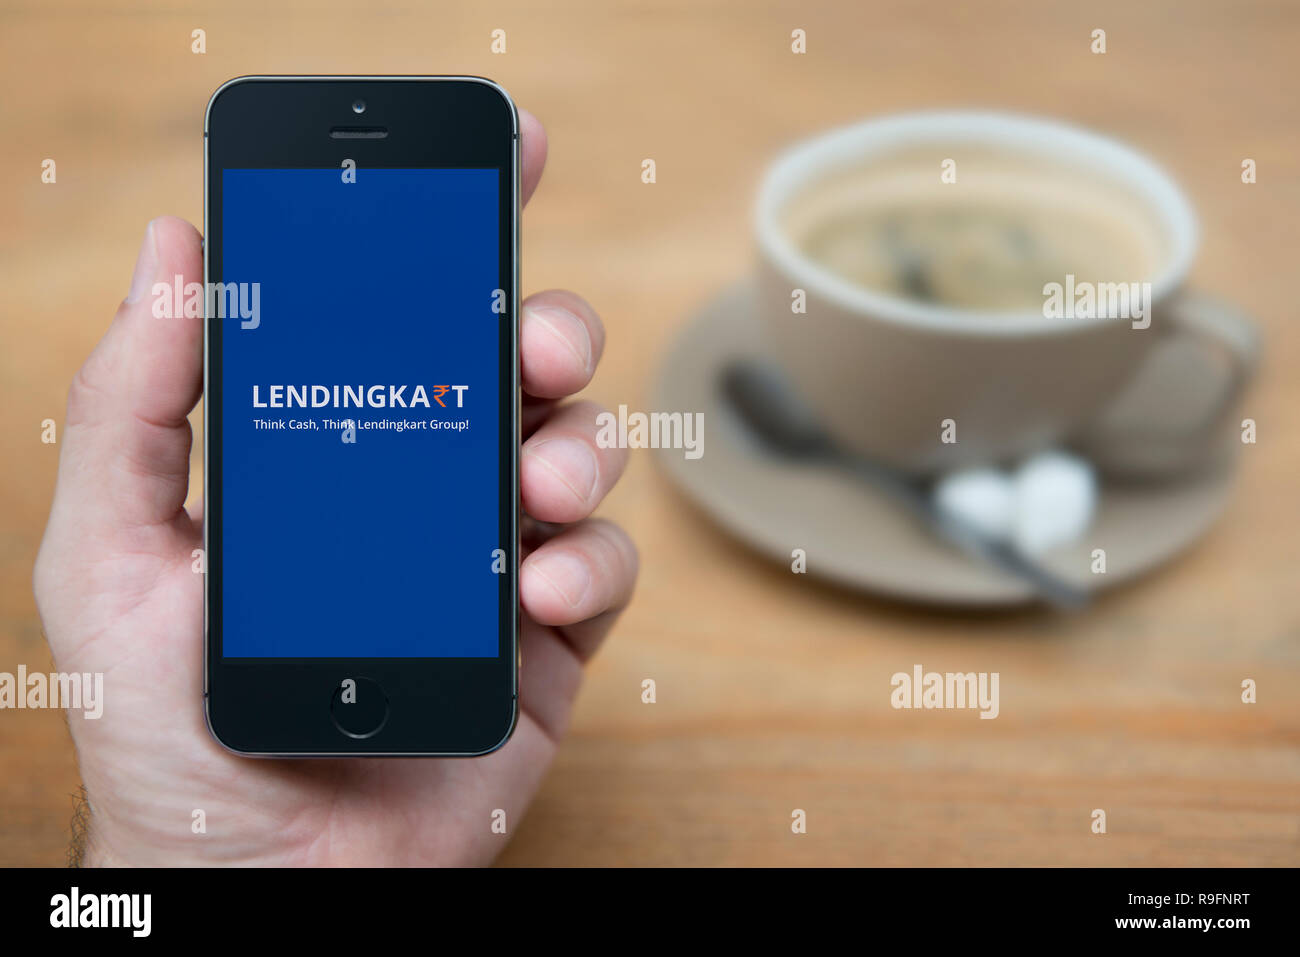 A man looks at his iPhone which displays the Lendingkart logo (Editorial use only). Stock Photo